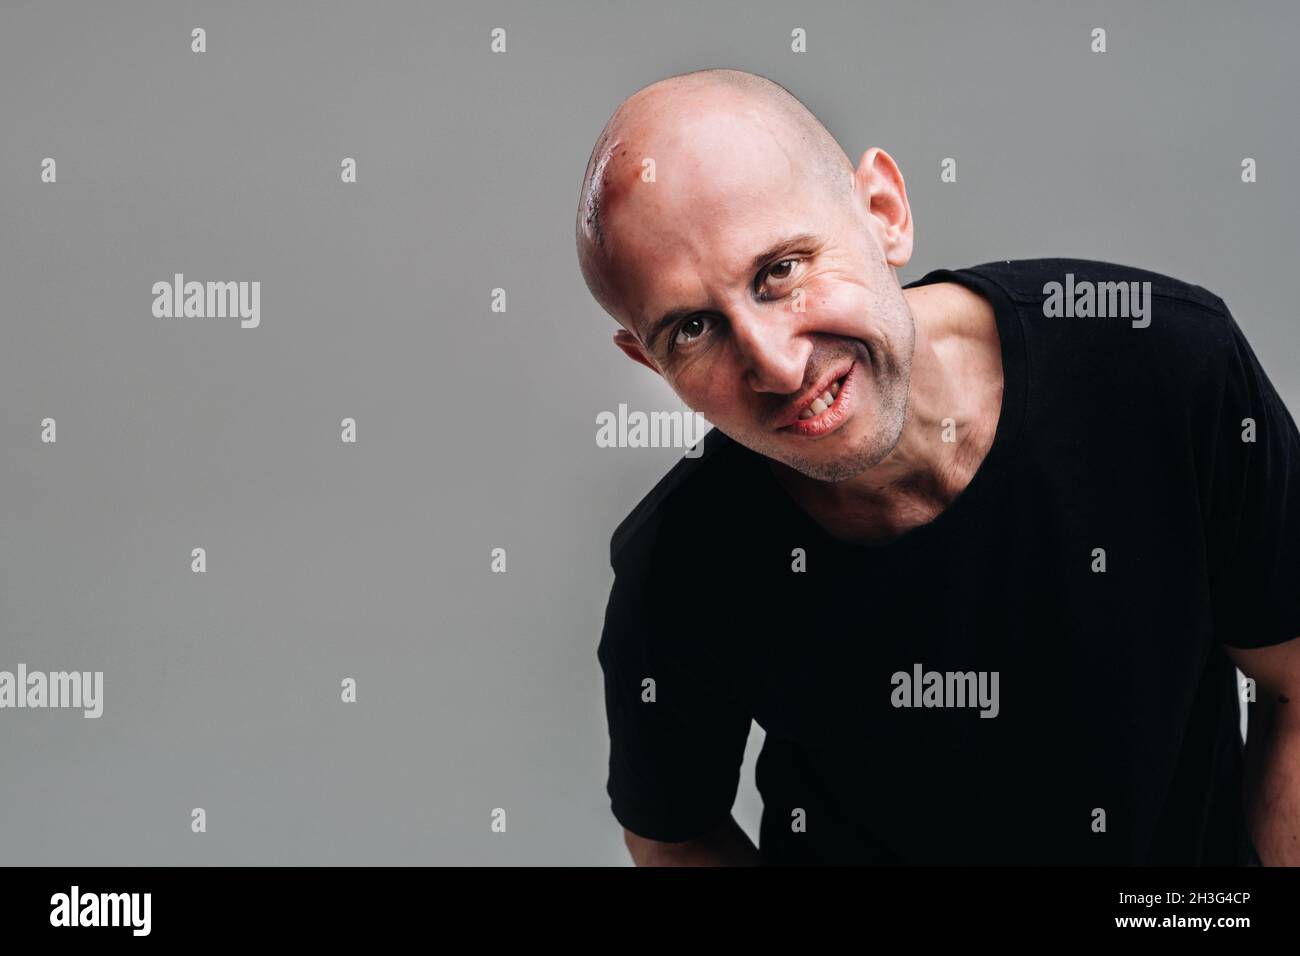 A battered man in a black T shirt who looks like a drug addict and a drunkard stands on a gray background. Stock Photo